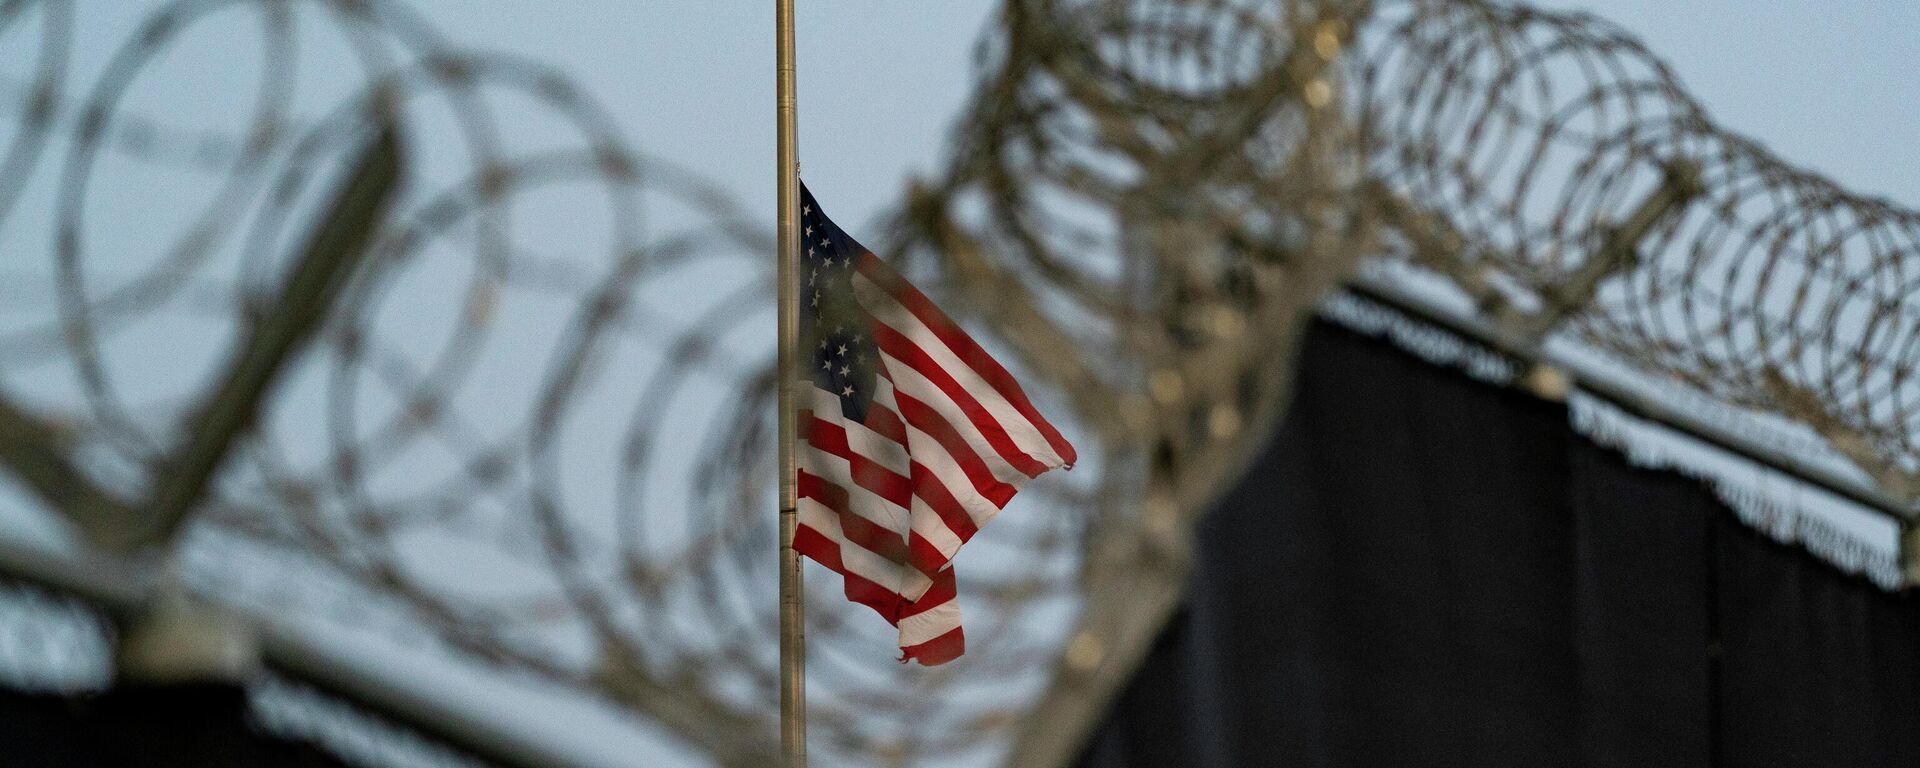 In this Aug. 29, 2021, file photo reviewed by U.S. military officials, a flag flies at half-staff in honor of the U.S. service members and other victims killed in the terrorist attack in Kabul, Afghanistan, as seen from Camp Justice in Guantanamo Bay Naval Base, Cuba. - Sputnik International, 1920, 10.01.2023